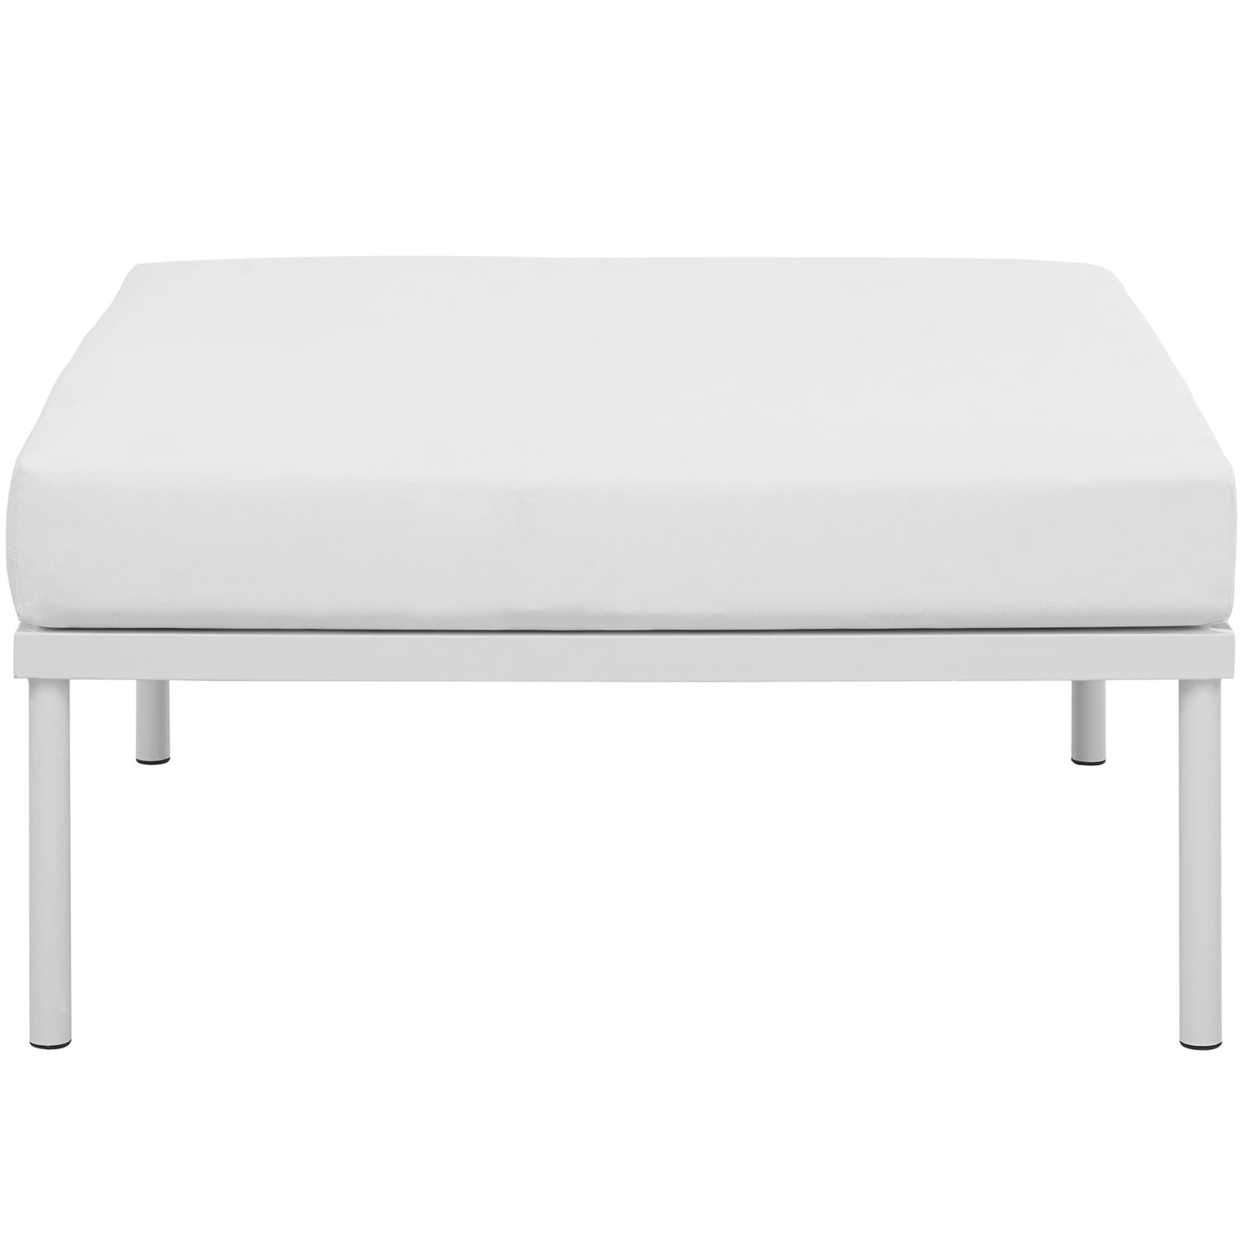 Modway Harmony Outdoor Patio Aluminum Fabric Ottoman in White/White - image 3 of 4